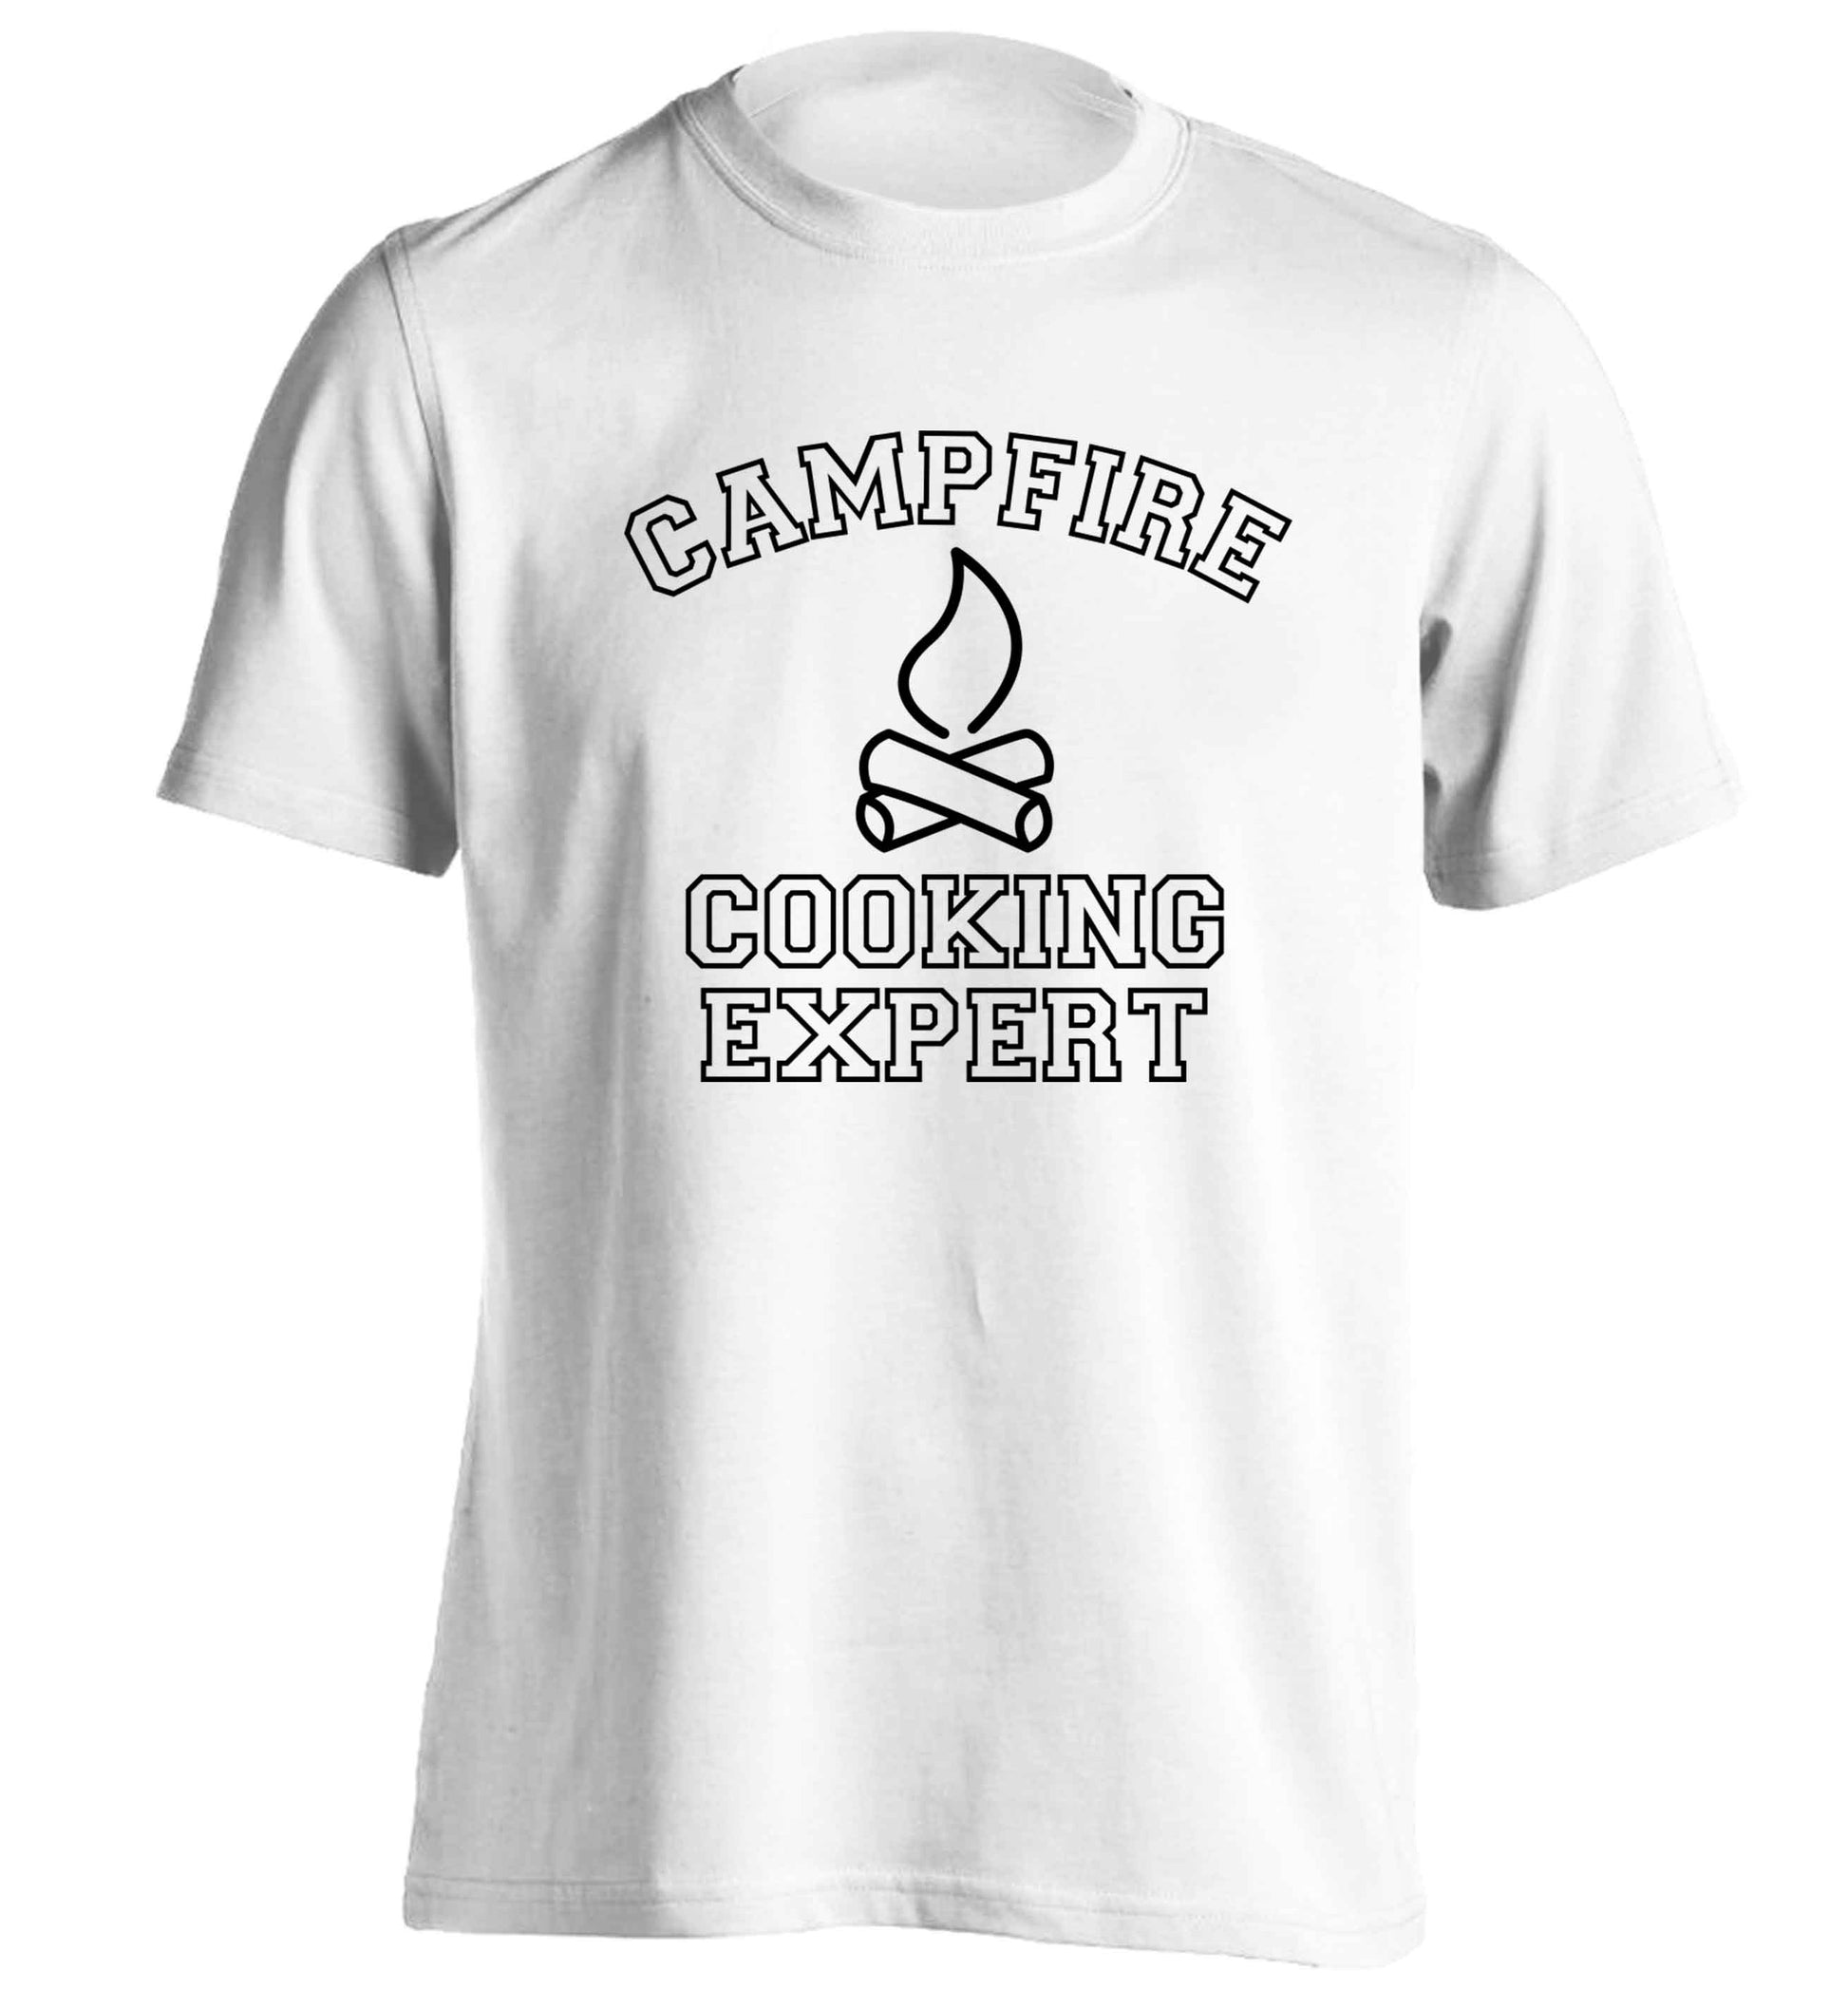 Campfire cooking expert adults unisex white Tshirt 2XL